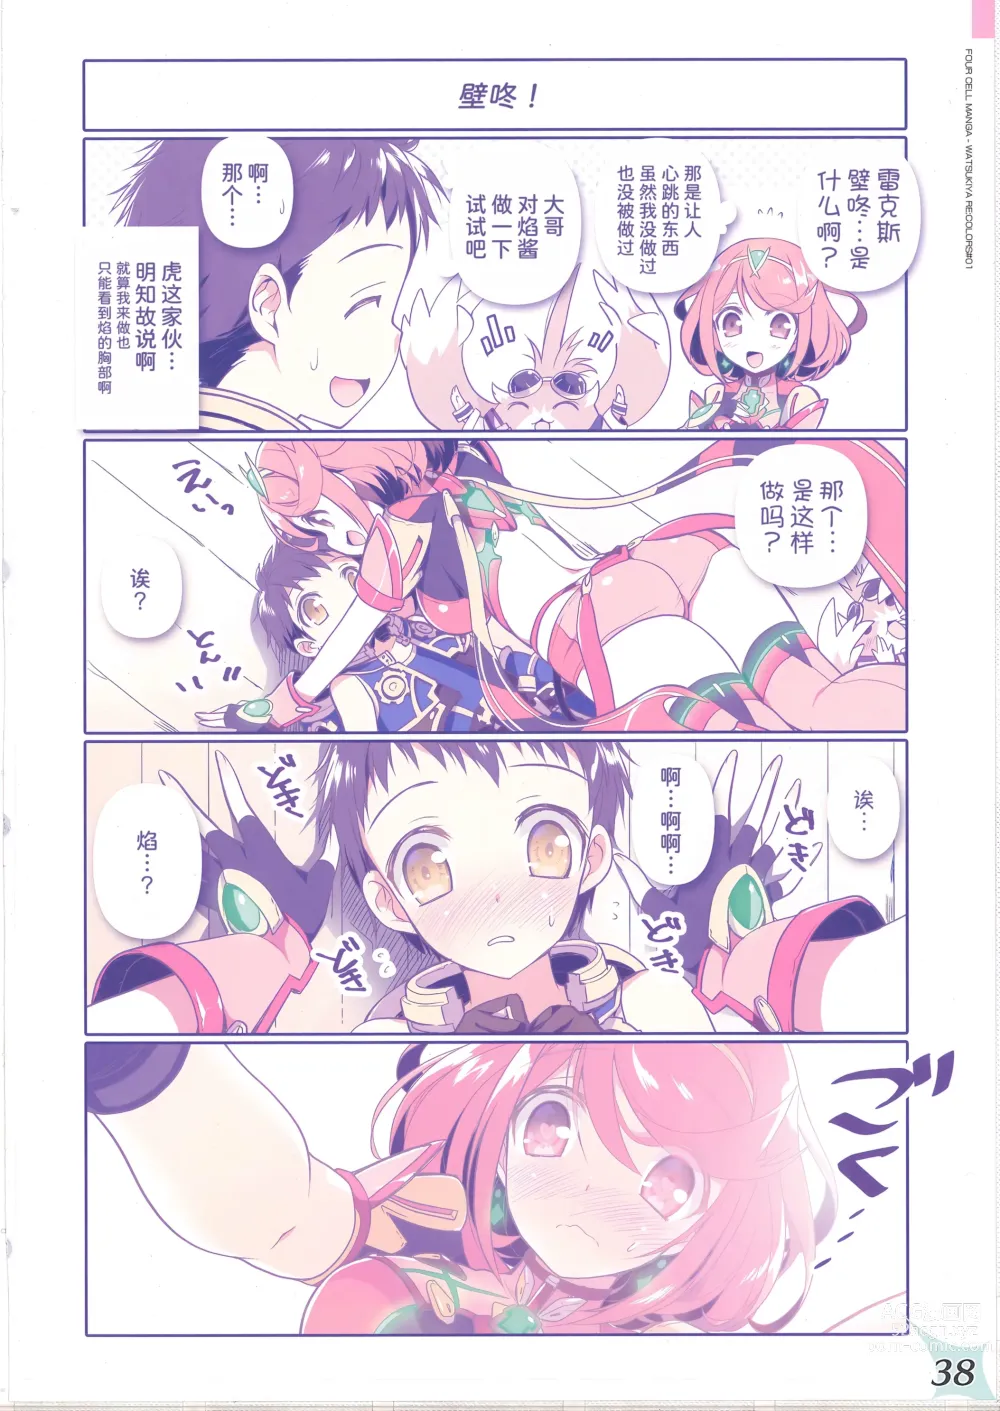 Page 37 of doujinshi RE:COLORS! #01 Colors!/Reboot Homu Hika Nia Route